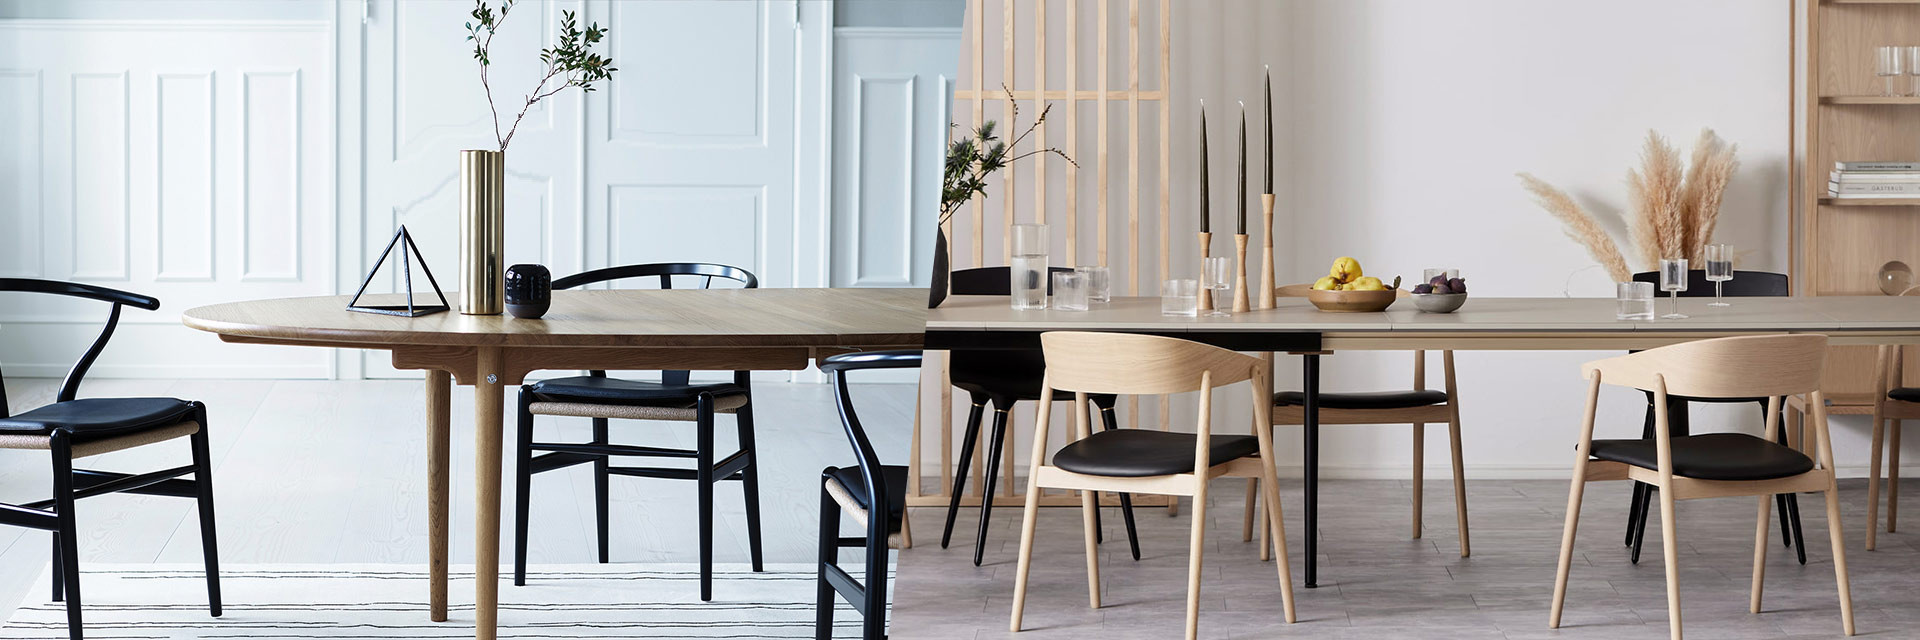 Scandinavian design furniture, lighting and decorative items for dining rooms.